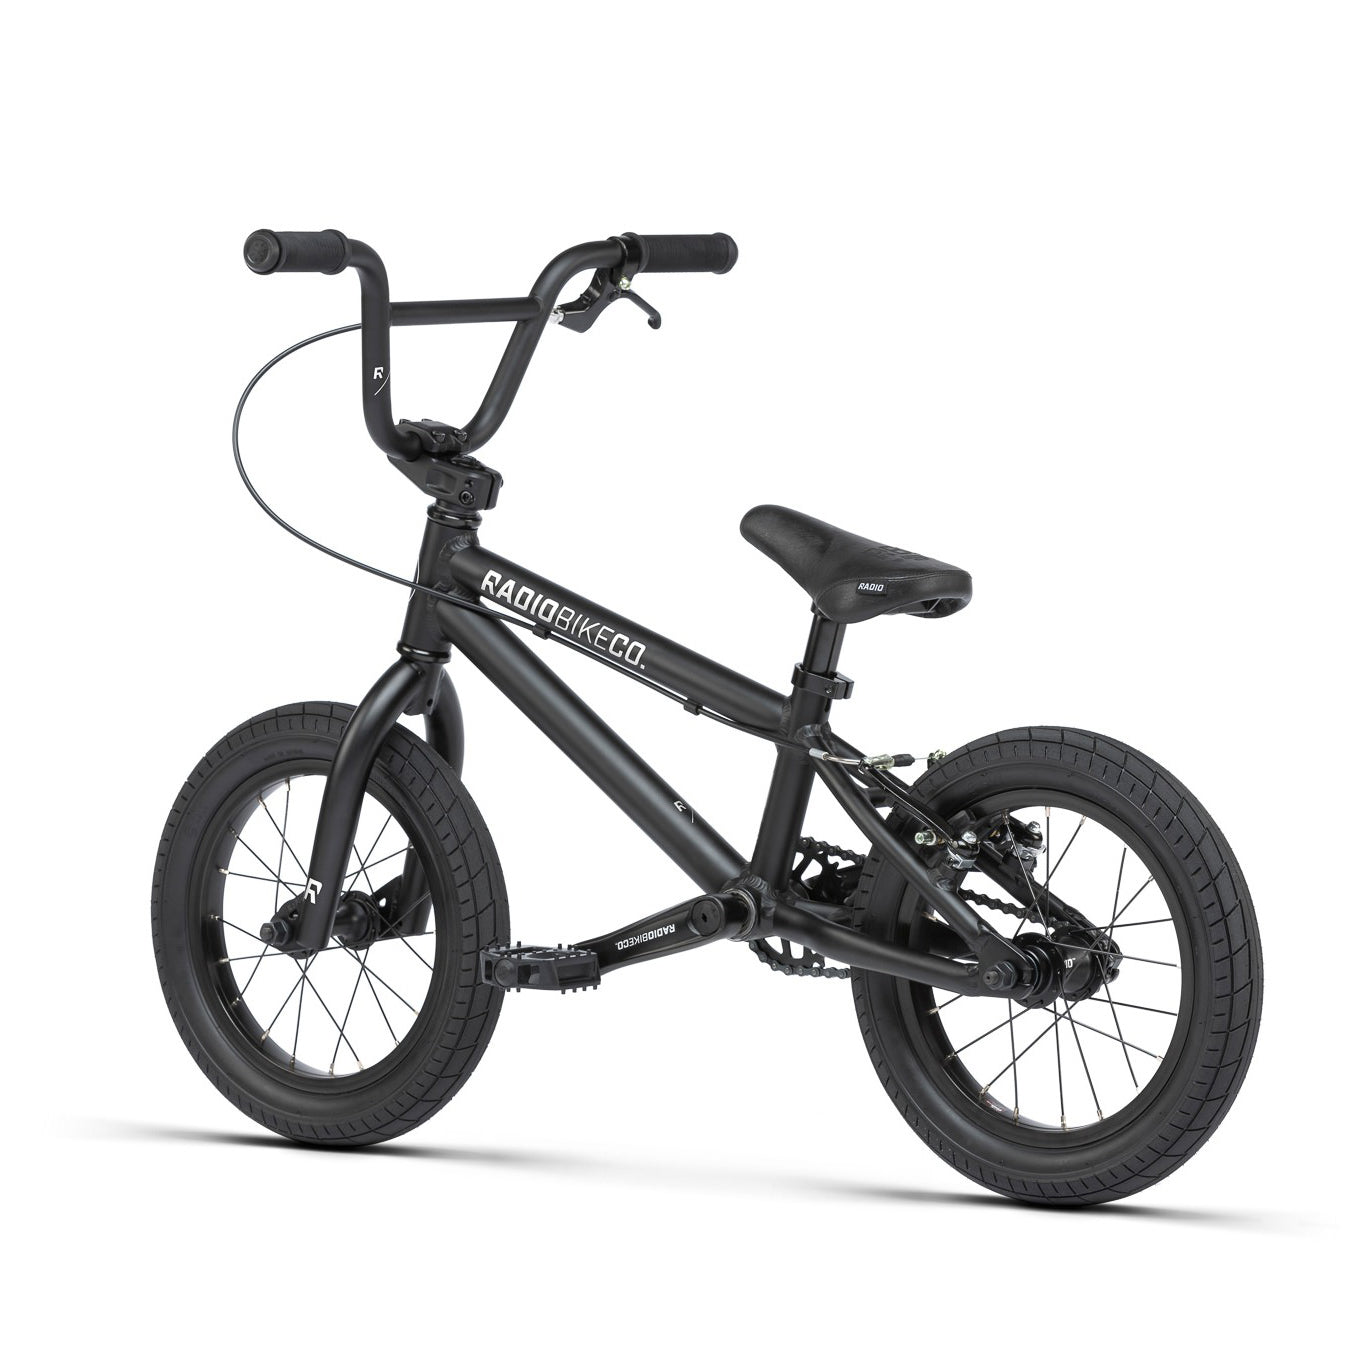 A black Radio Dice 14 Inch Bike designed for kids, featuring a sturdy frame, training wheels, and "Radio Bike Co" branding. Crafted from lightweight 6061-T6 alloy for durability and ease of use.